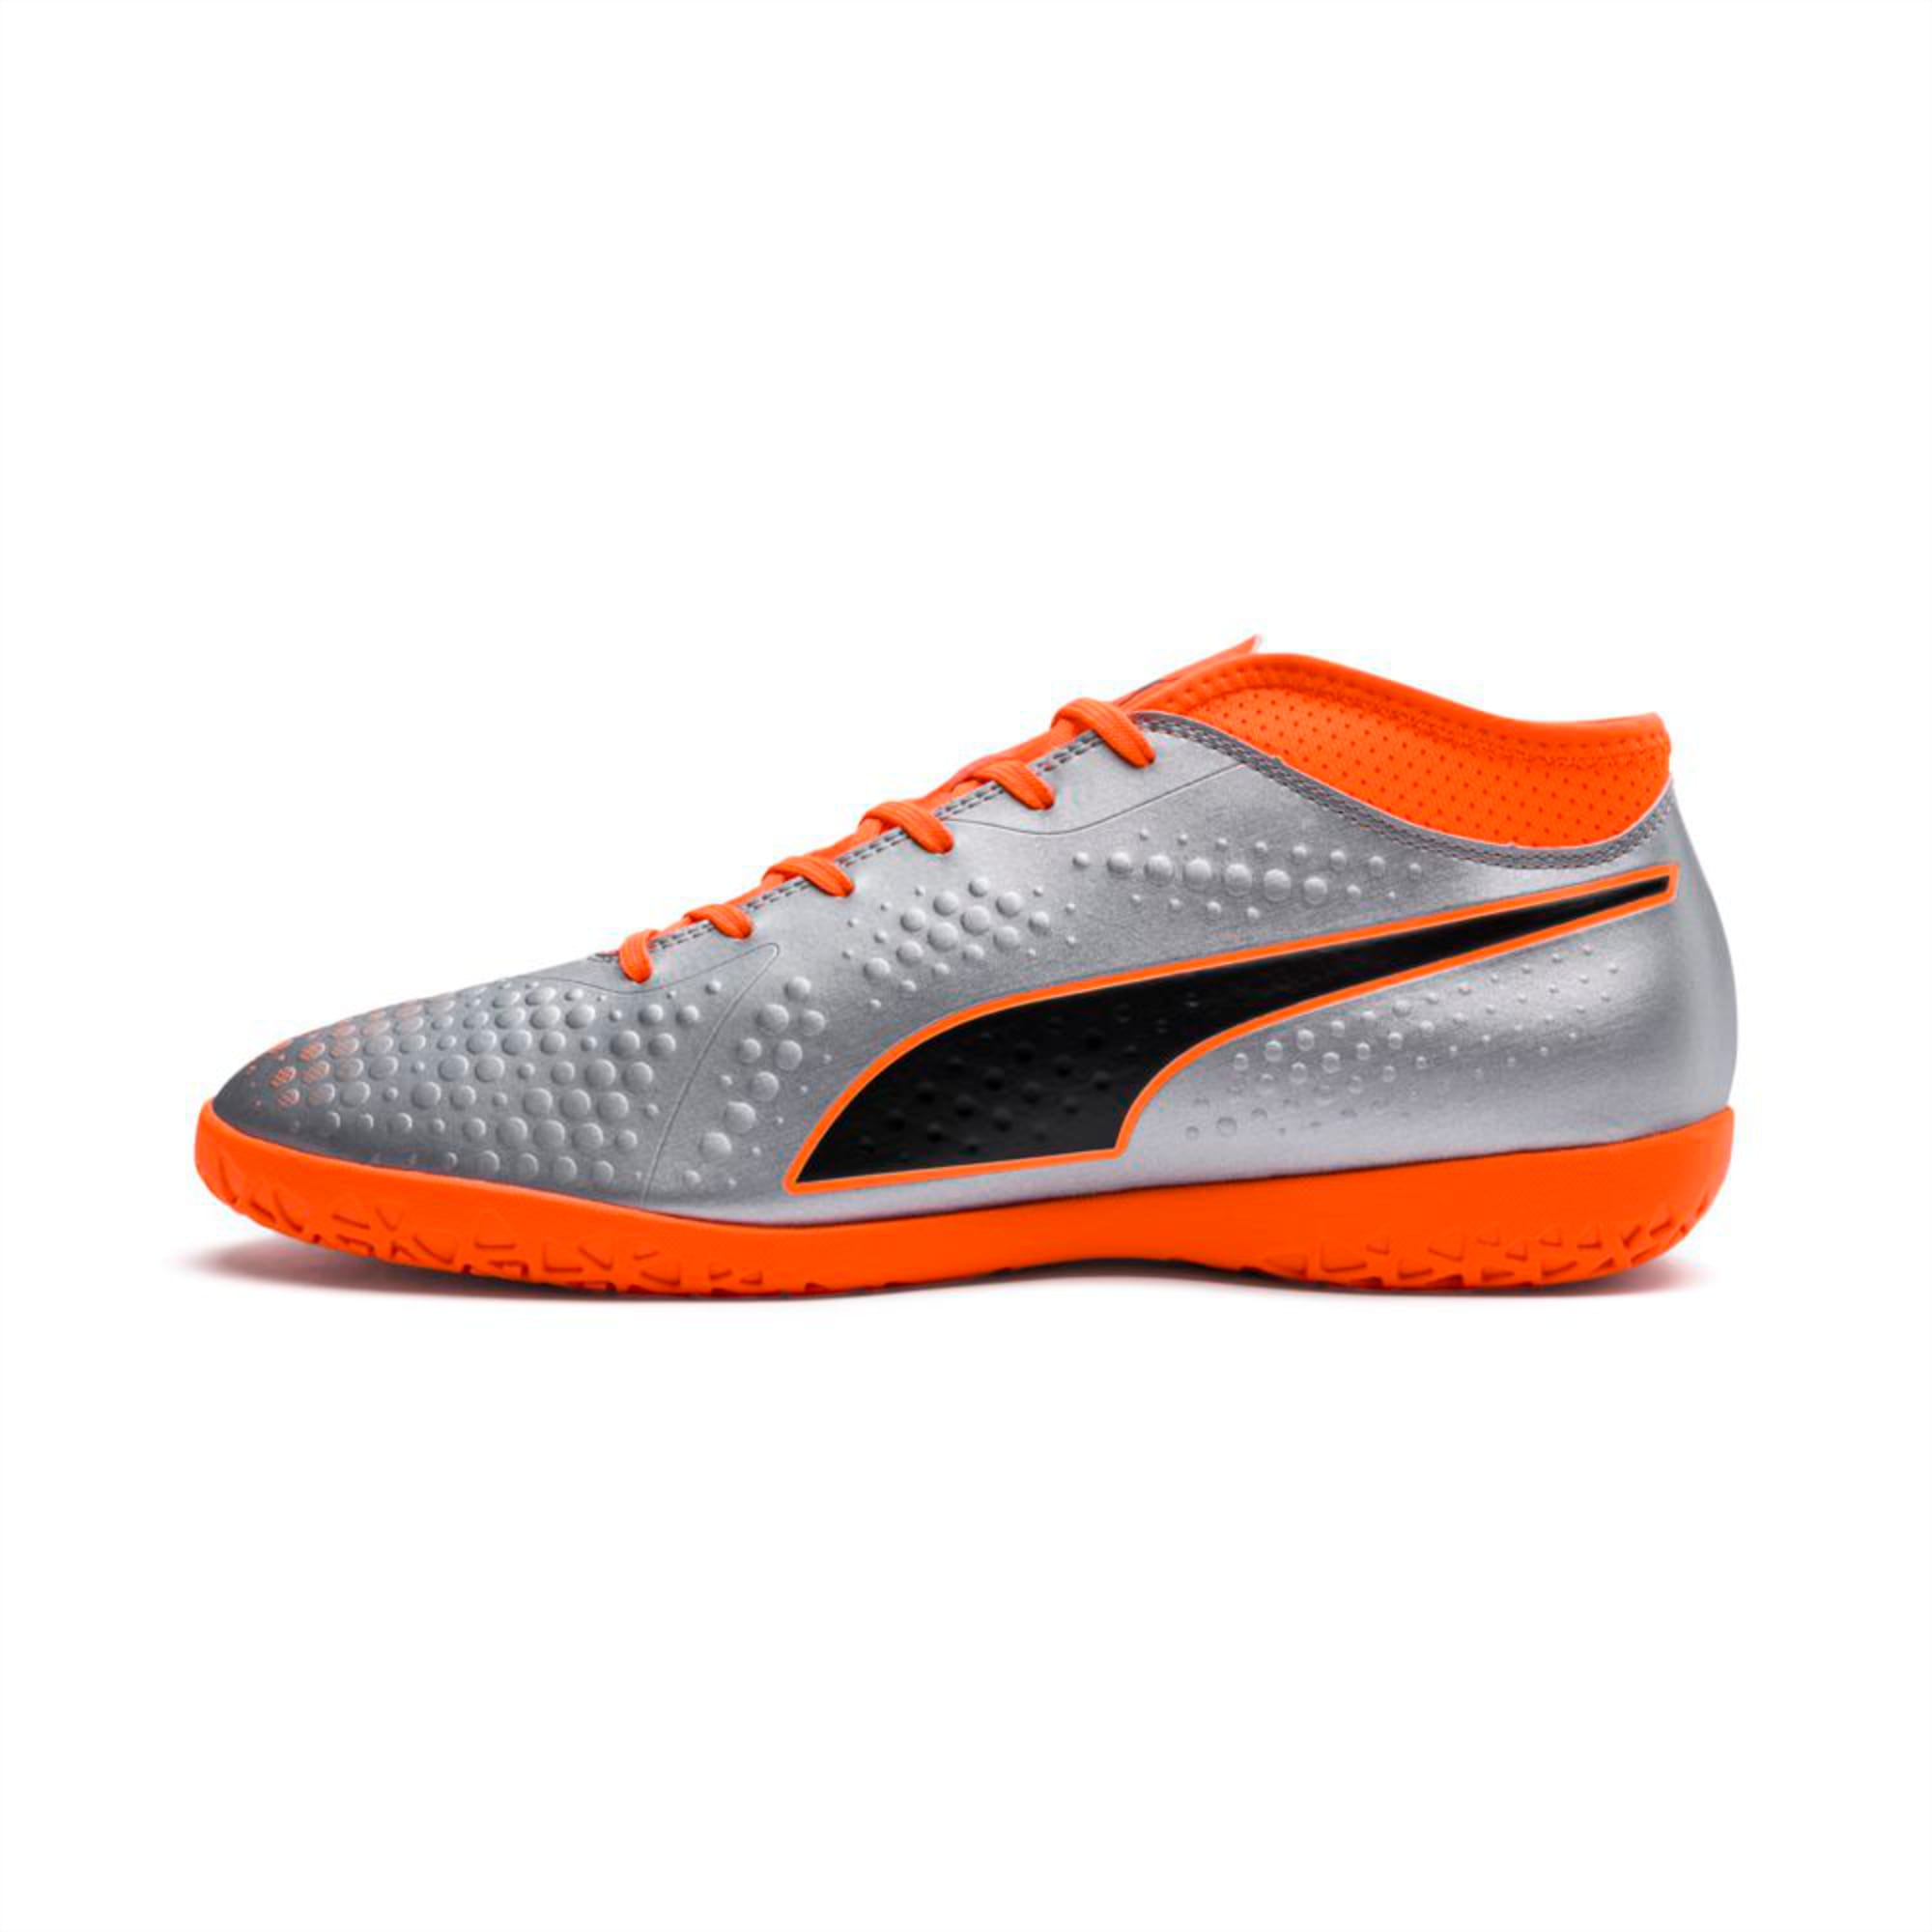 PUMA ONE 4 Synthetic IT Football Shoes 